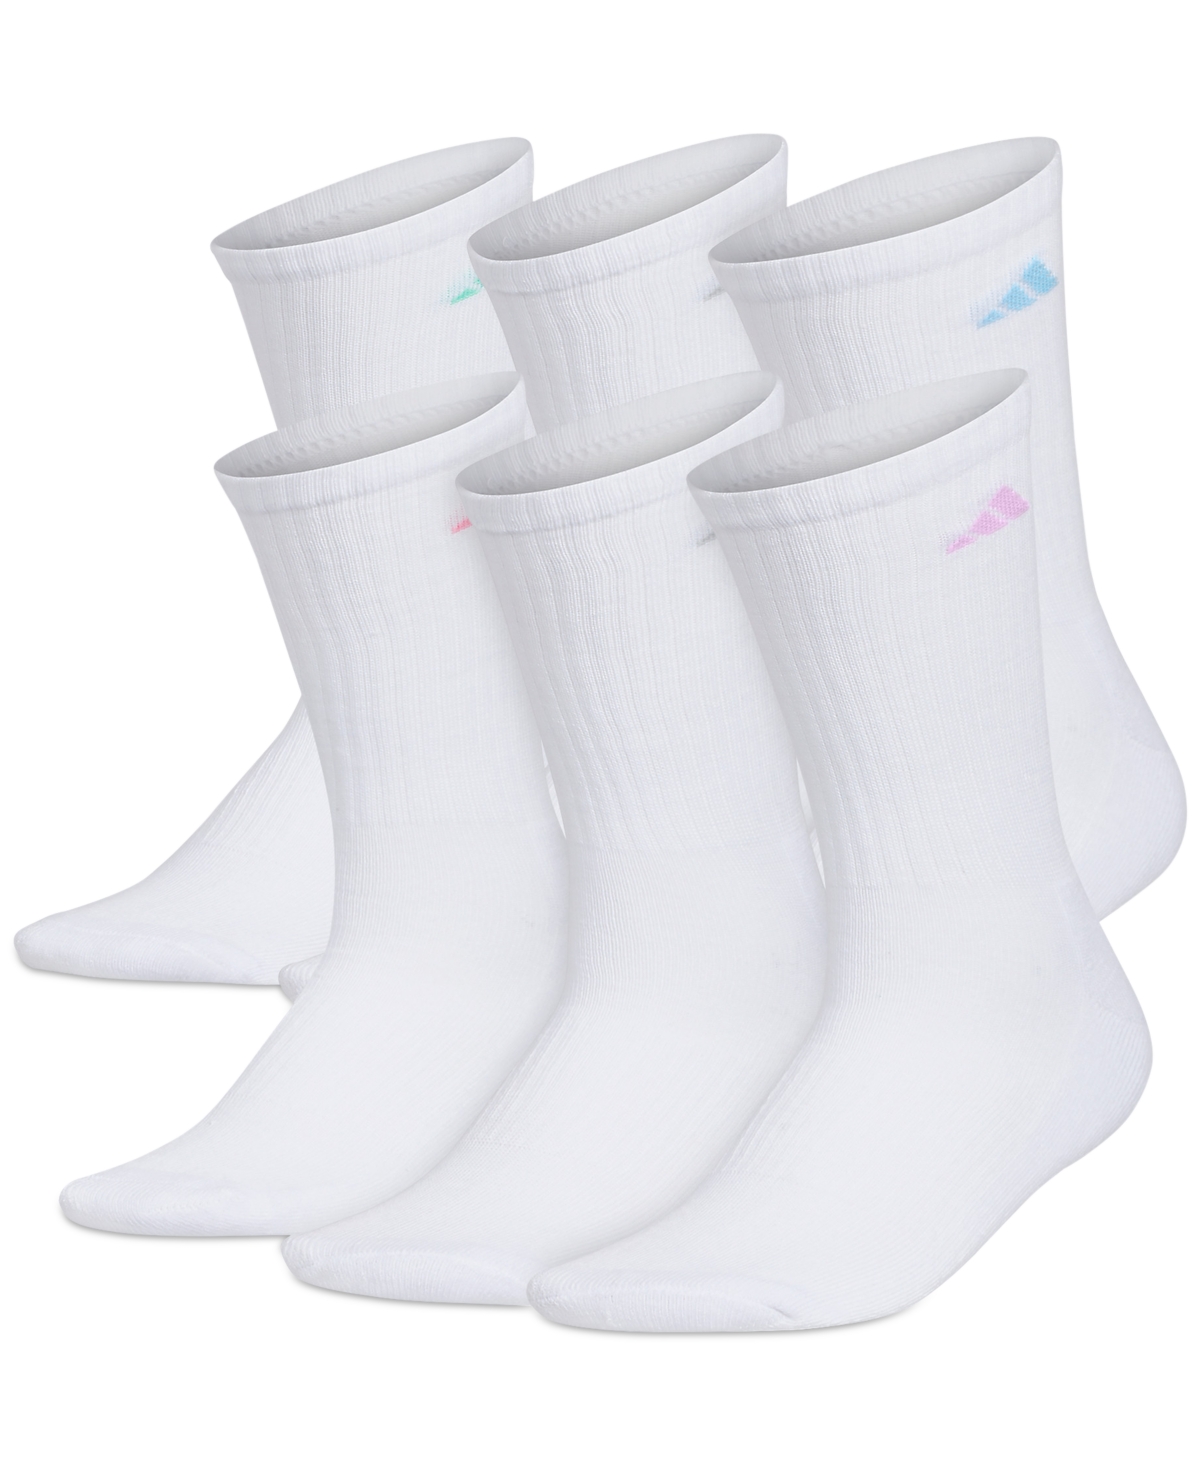 Women's 6-Pk. Athletic Cushioned Crew Socks - White/clear Sky Blue/bliss Lilac Purple